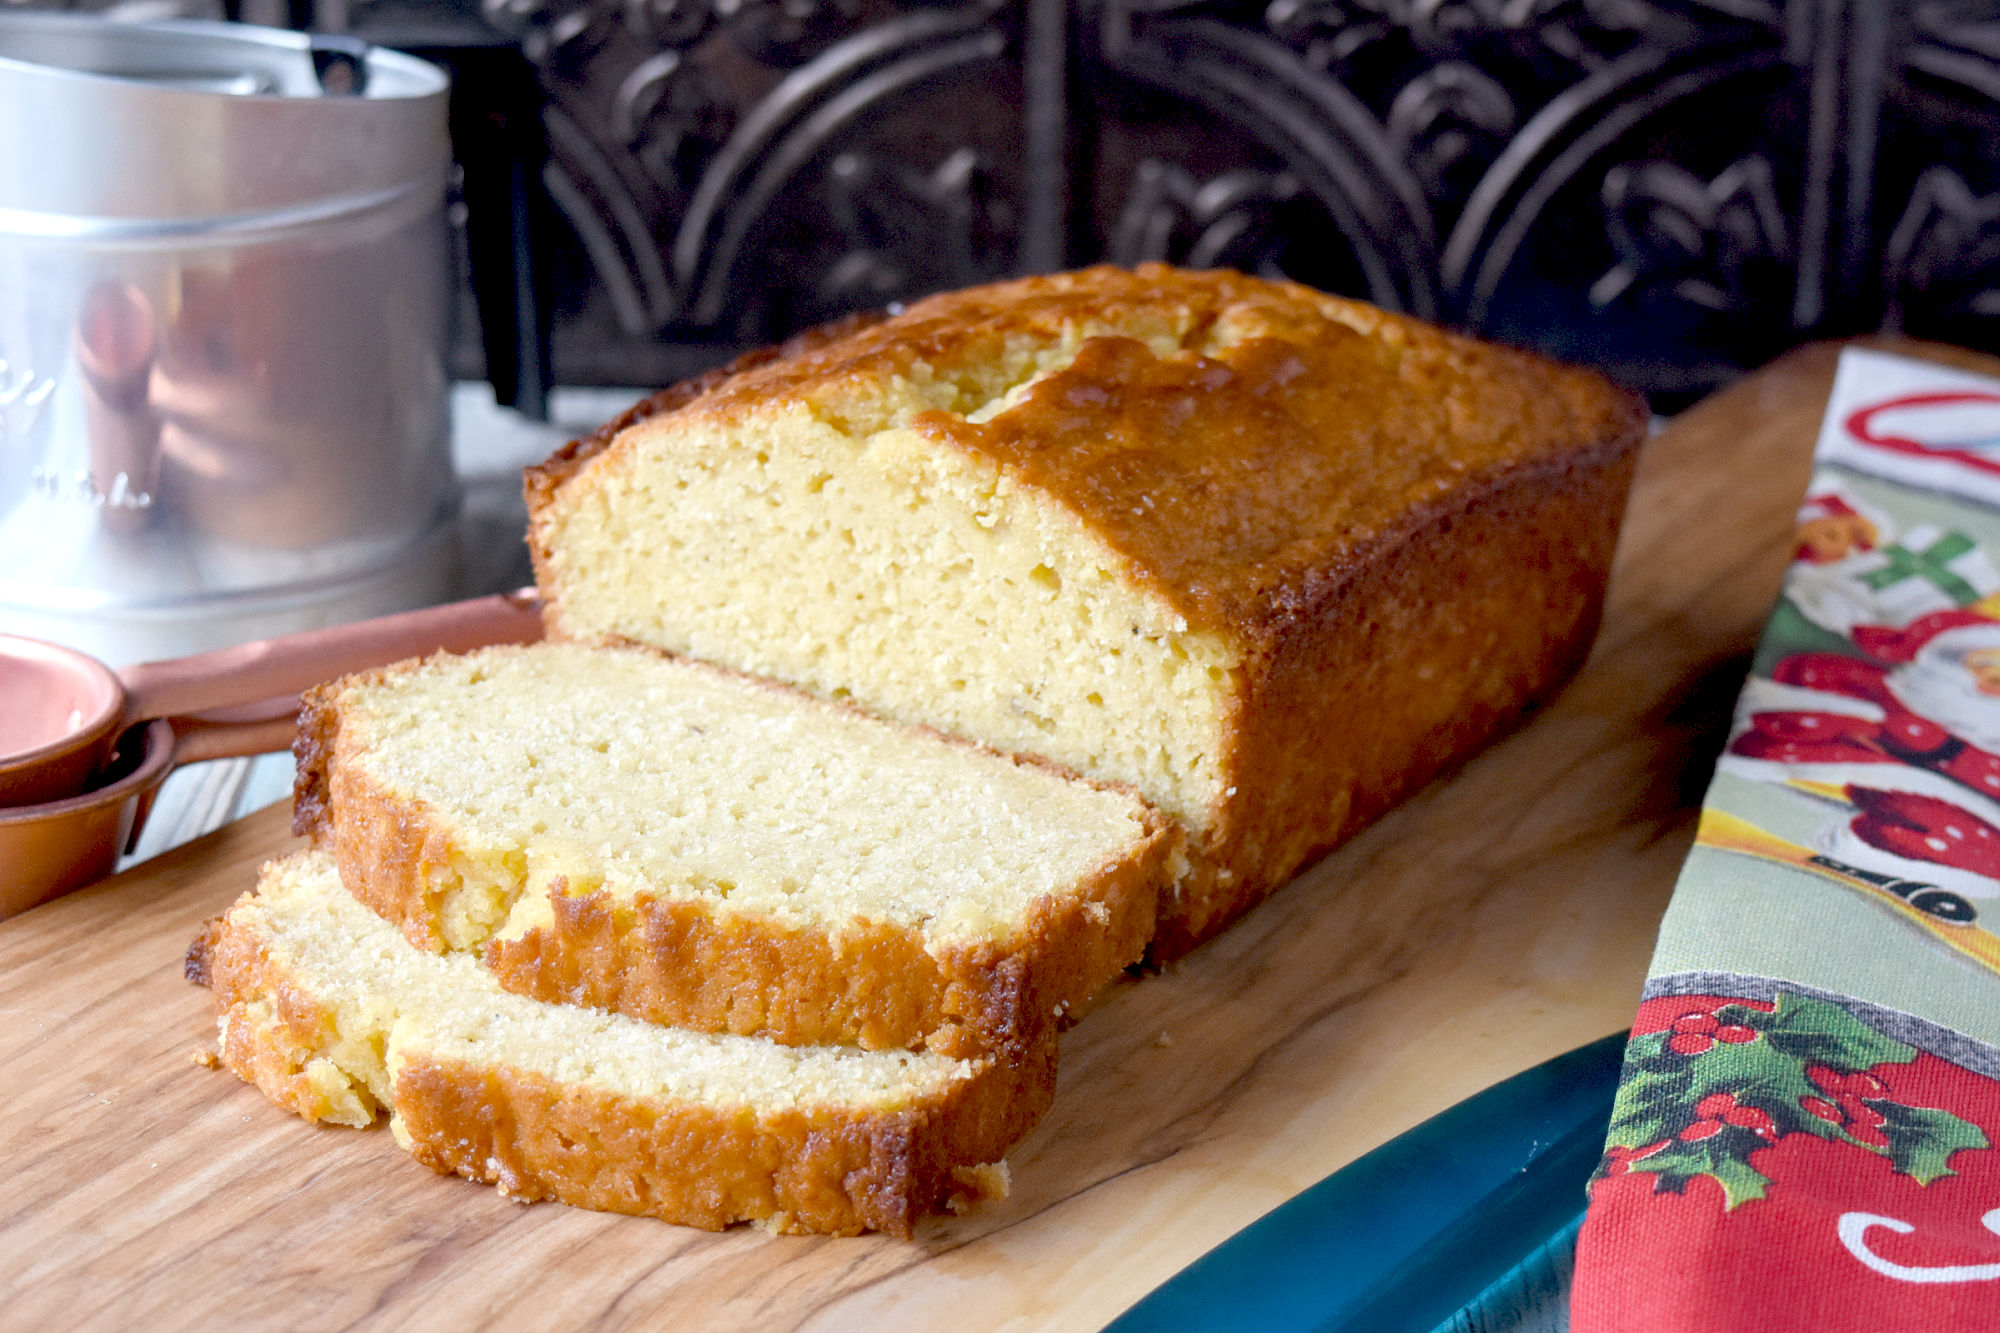 This Easy Eggnog Bread Recipe whips up in just a few minutes. It’s something you can throw together before everyone gets up then bake it while everyone trickles down to the kitchen. #ChristmasSweetsWeek #eggnog #quickbread #easyeggnogbread